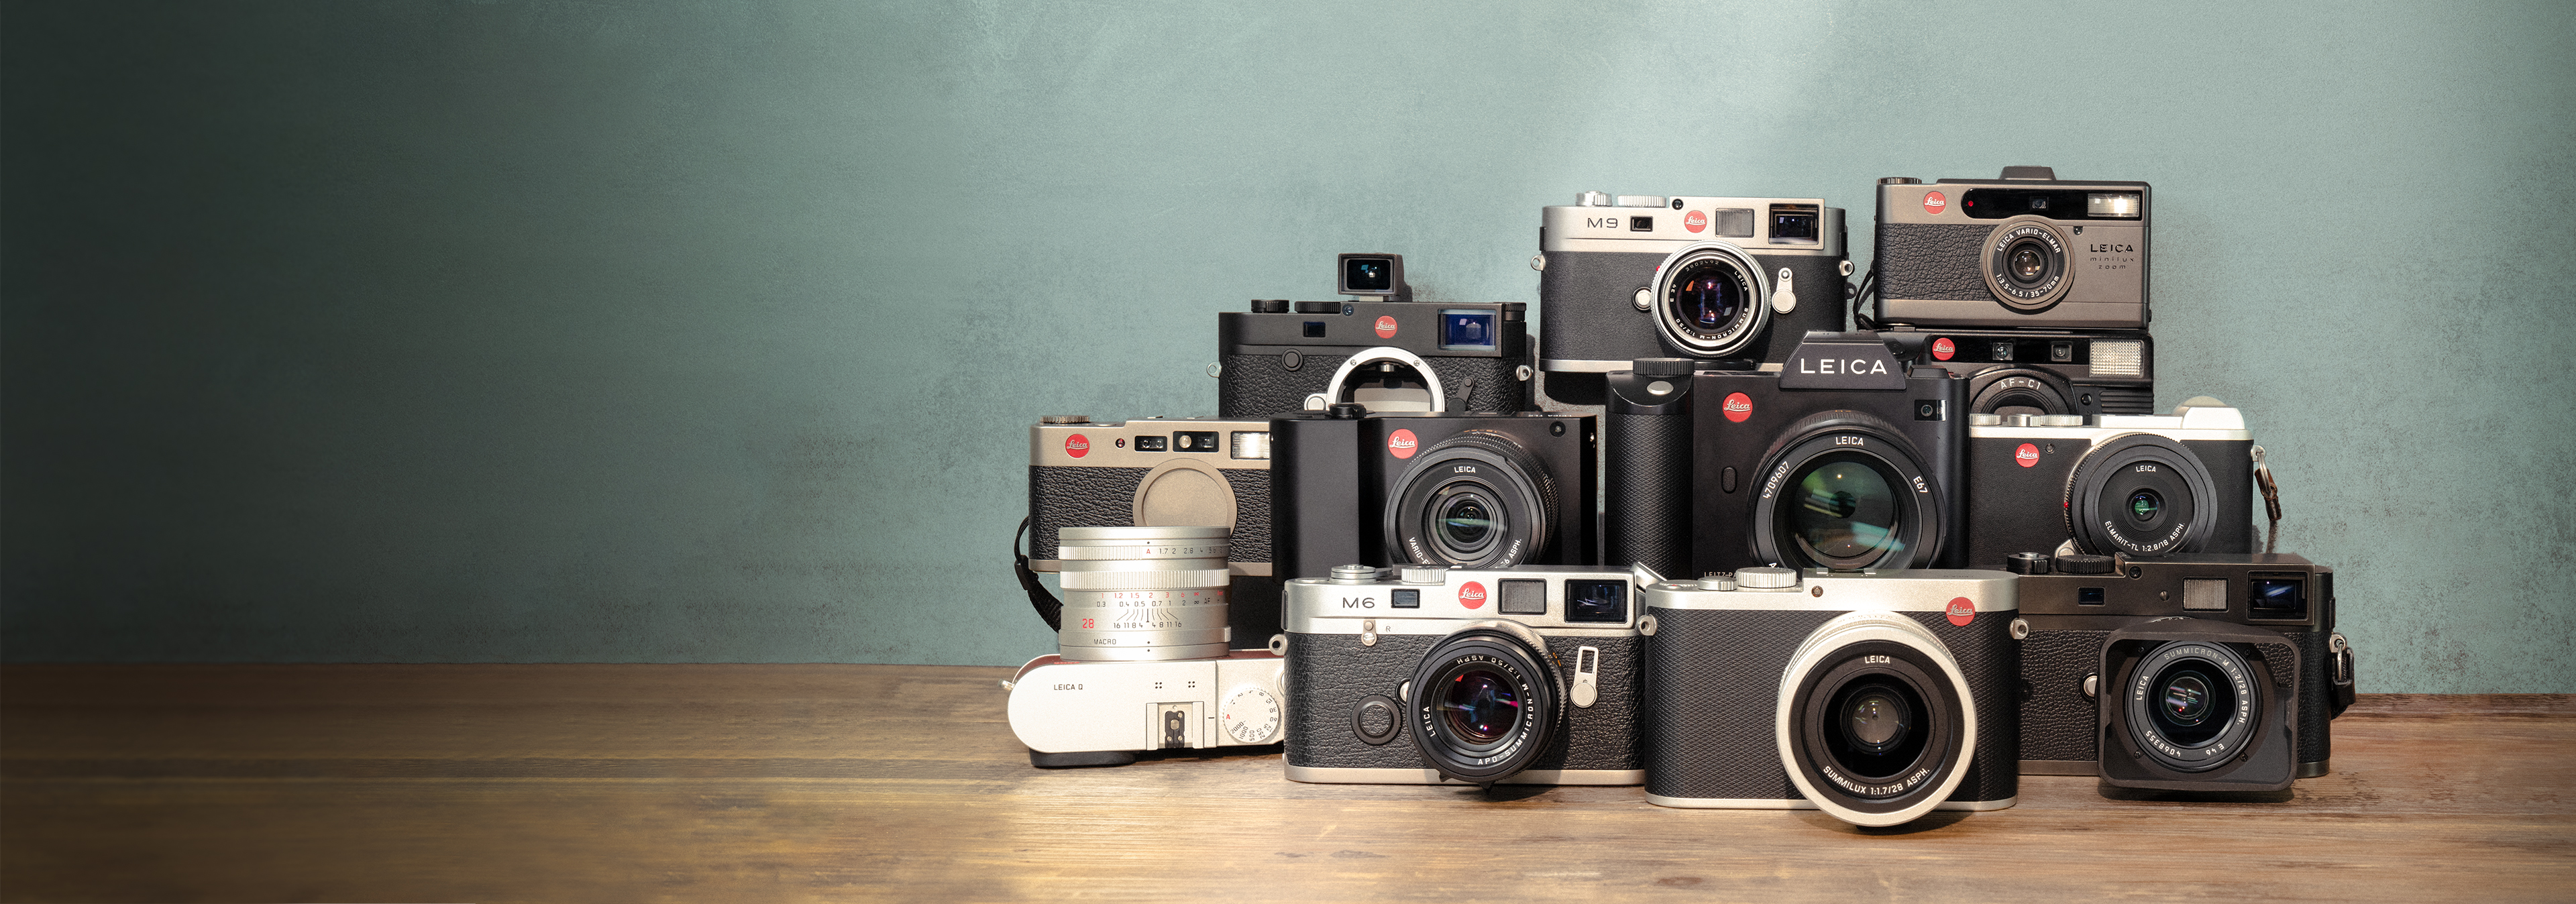 Leica Camera Pre-Owned & Used Products: